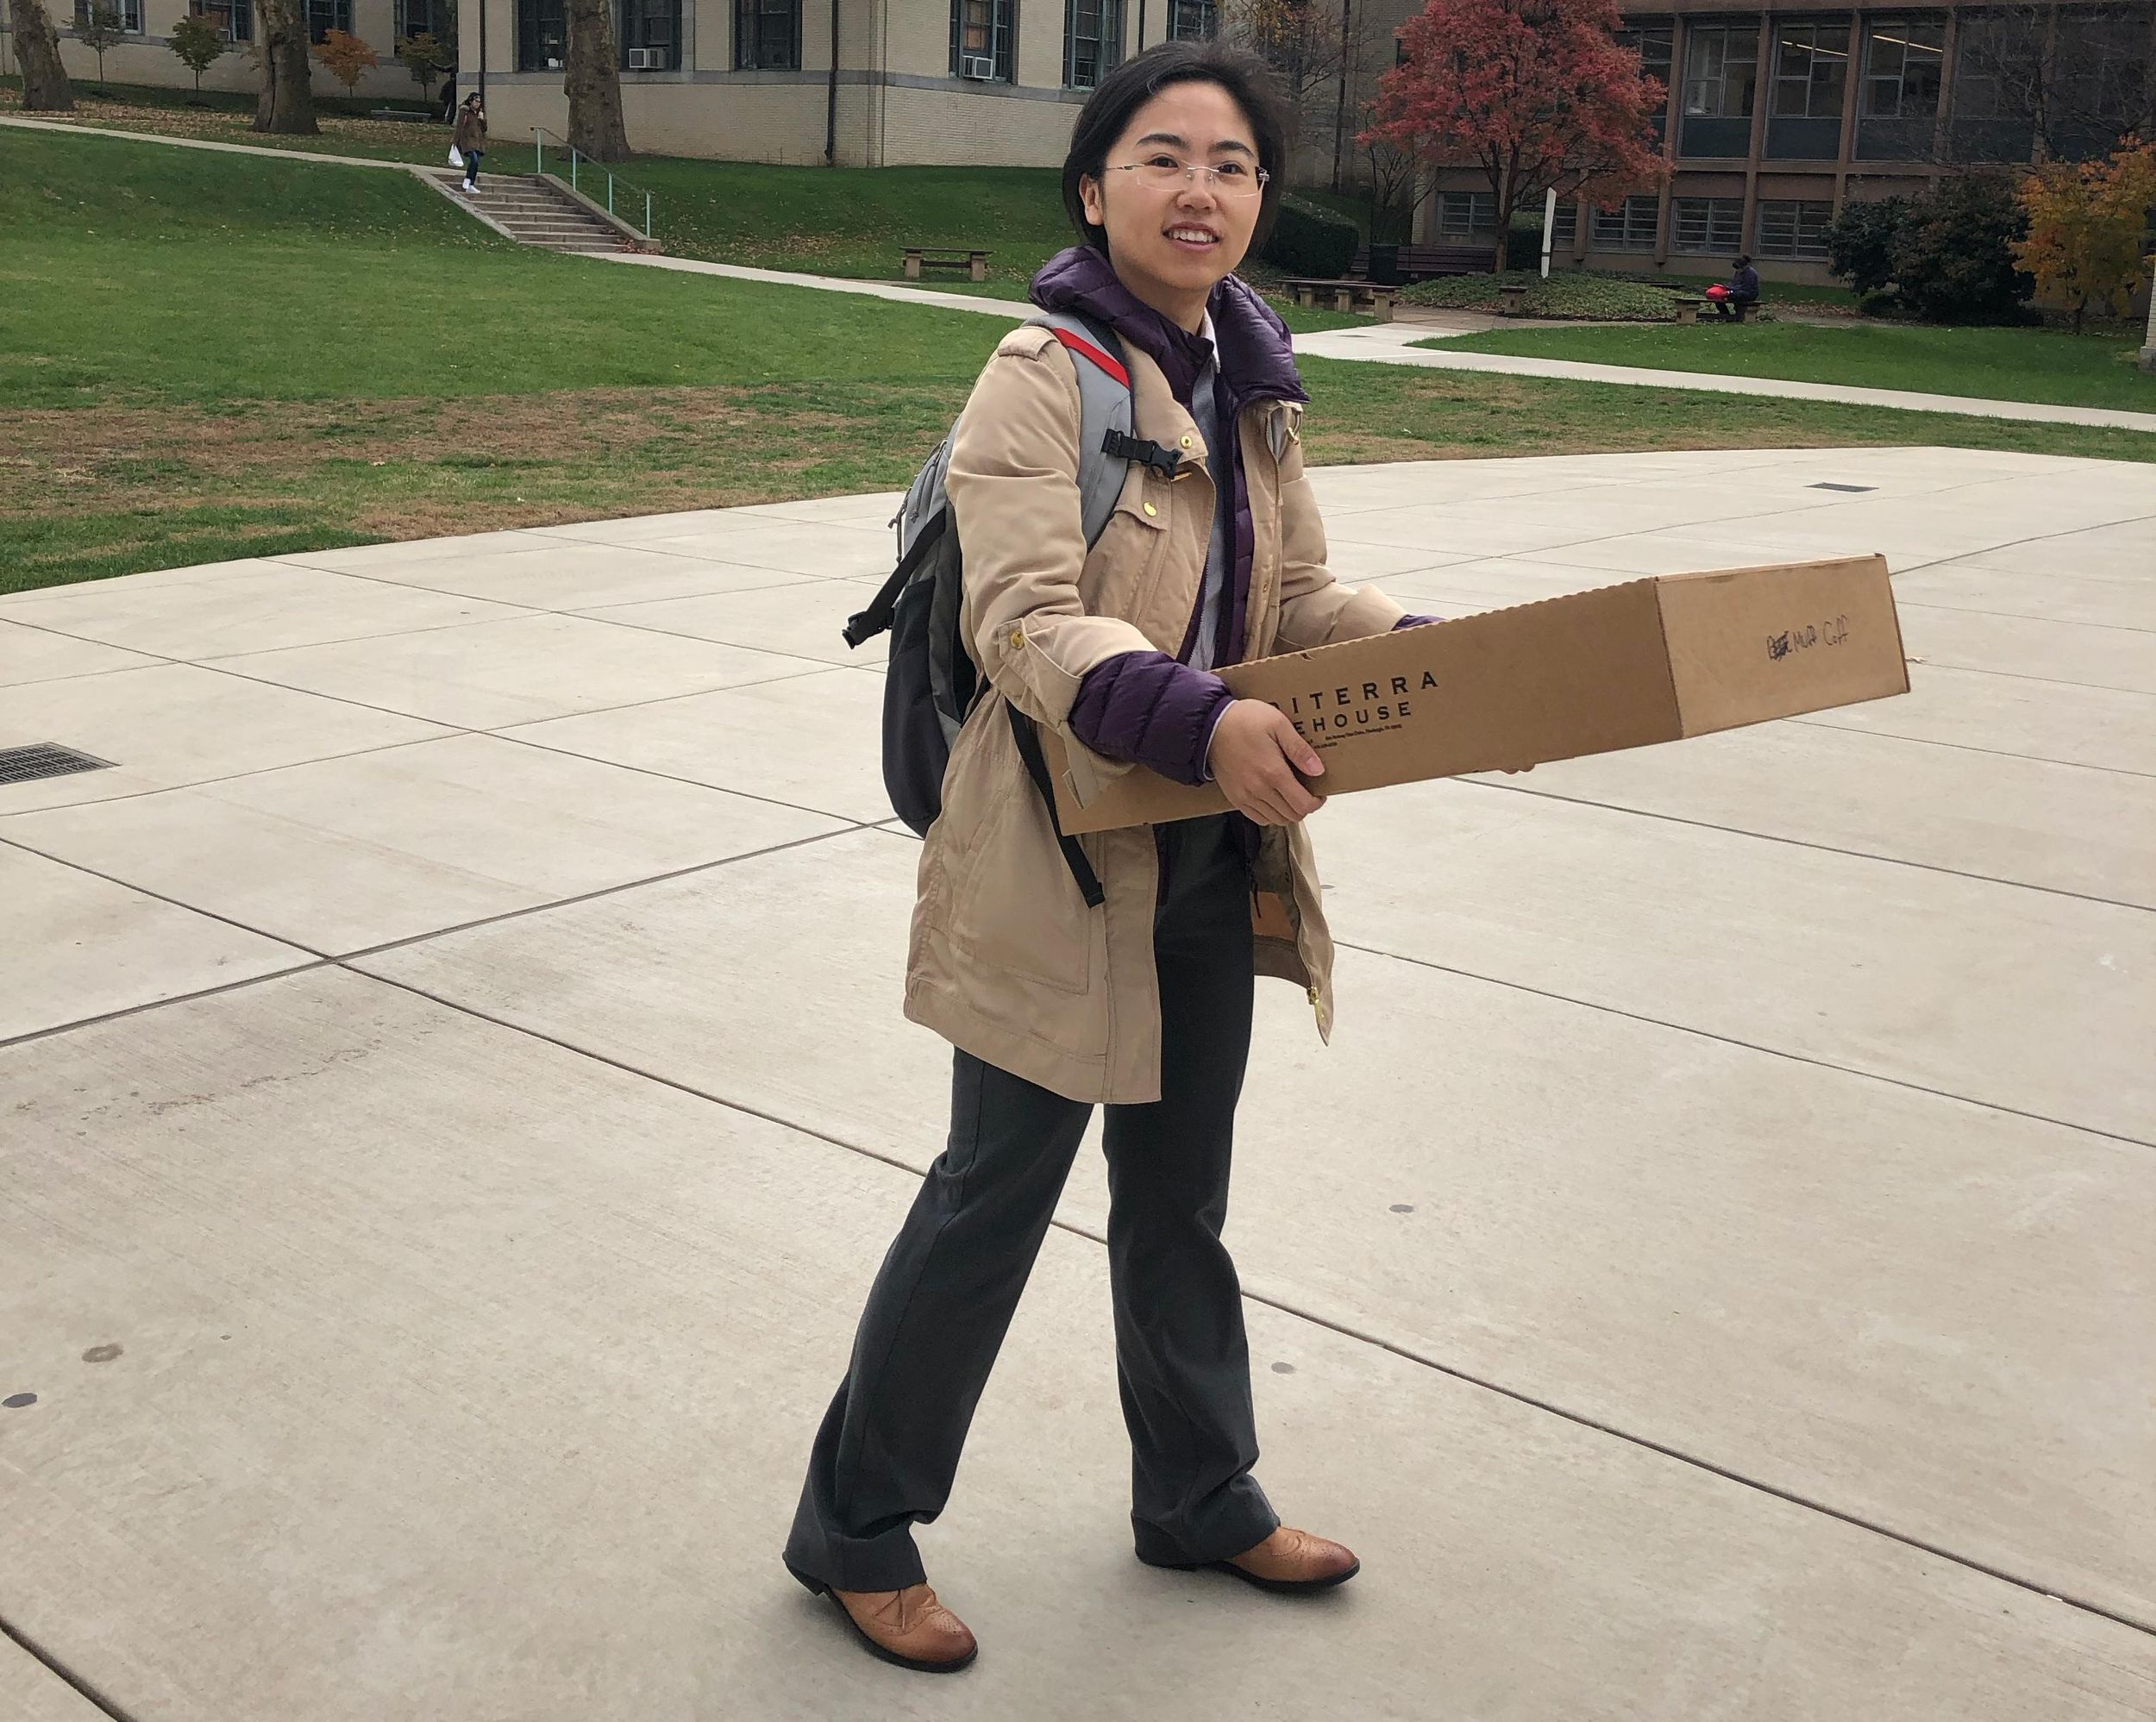 A photograph of a woman carrying a large brown box.